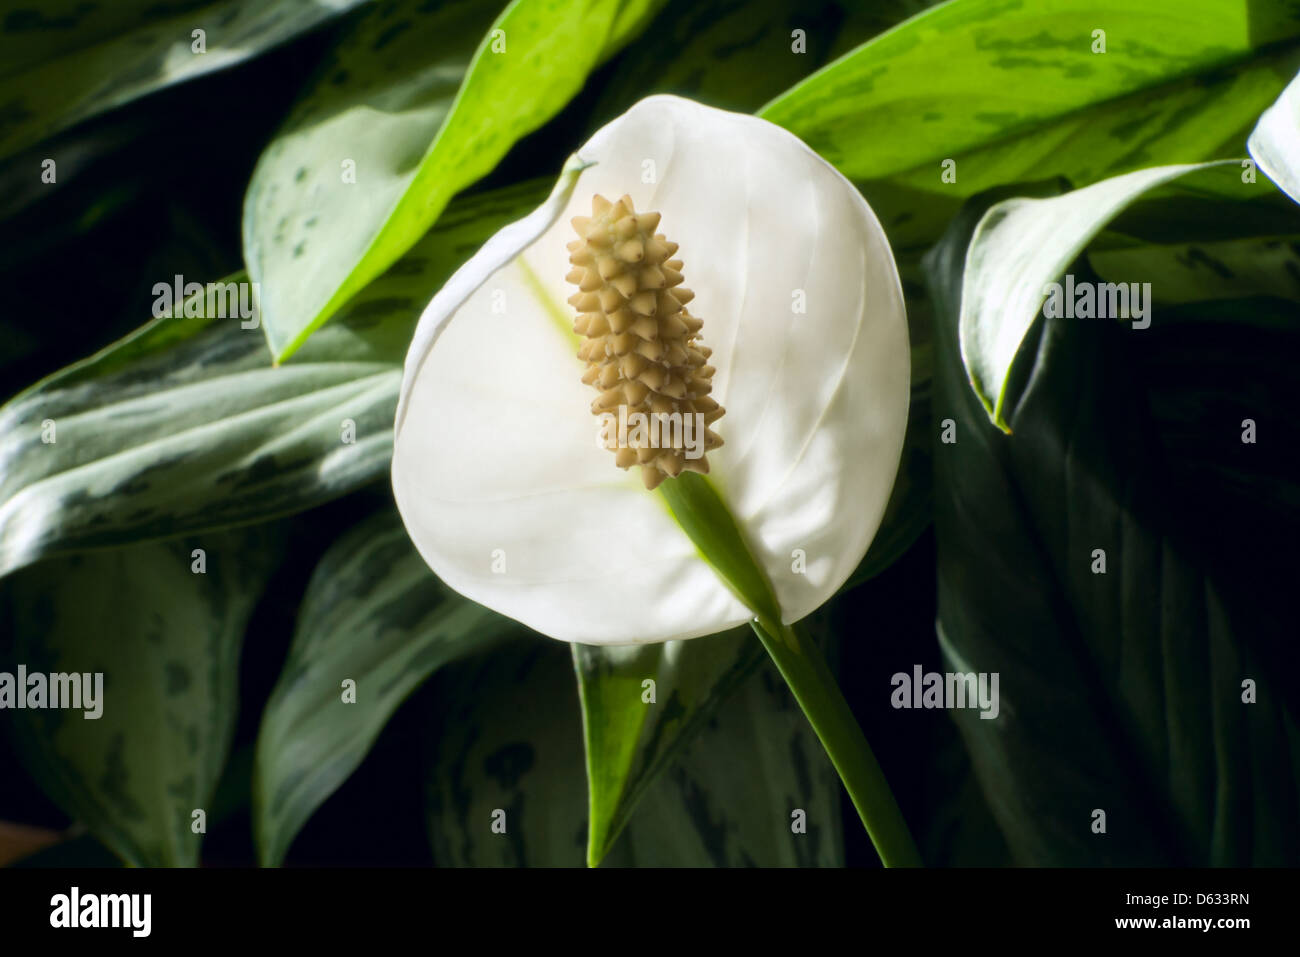 Peace Lily or Spathiphyllum cochlearispathum plant in full bloom Stock Photo